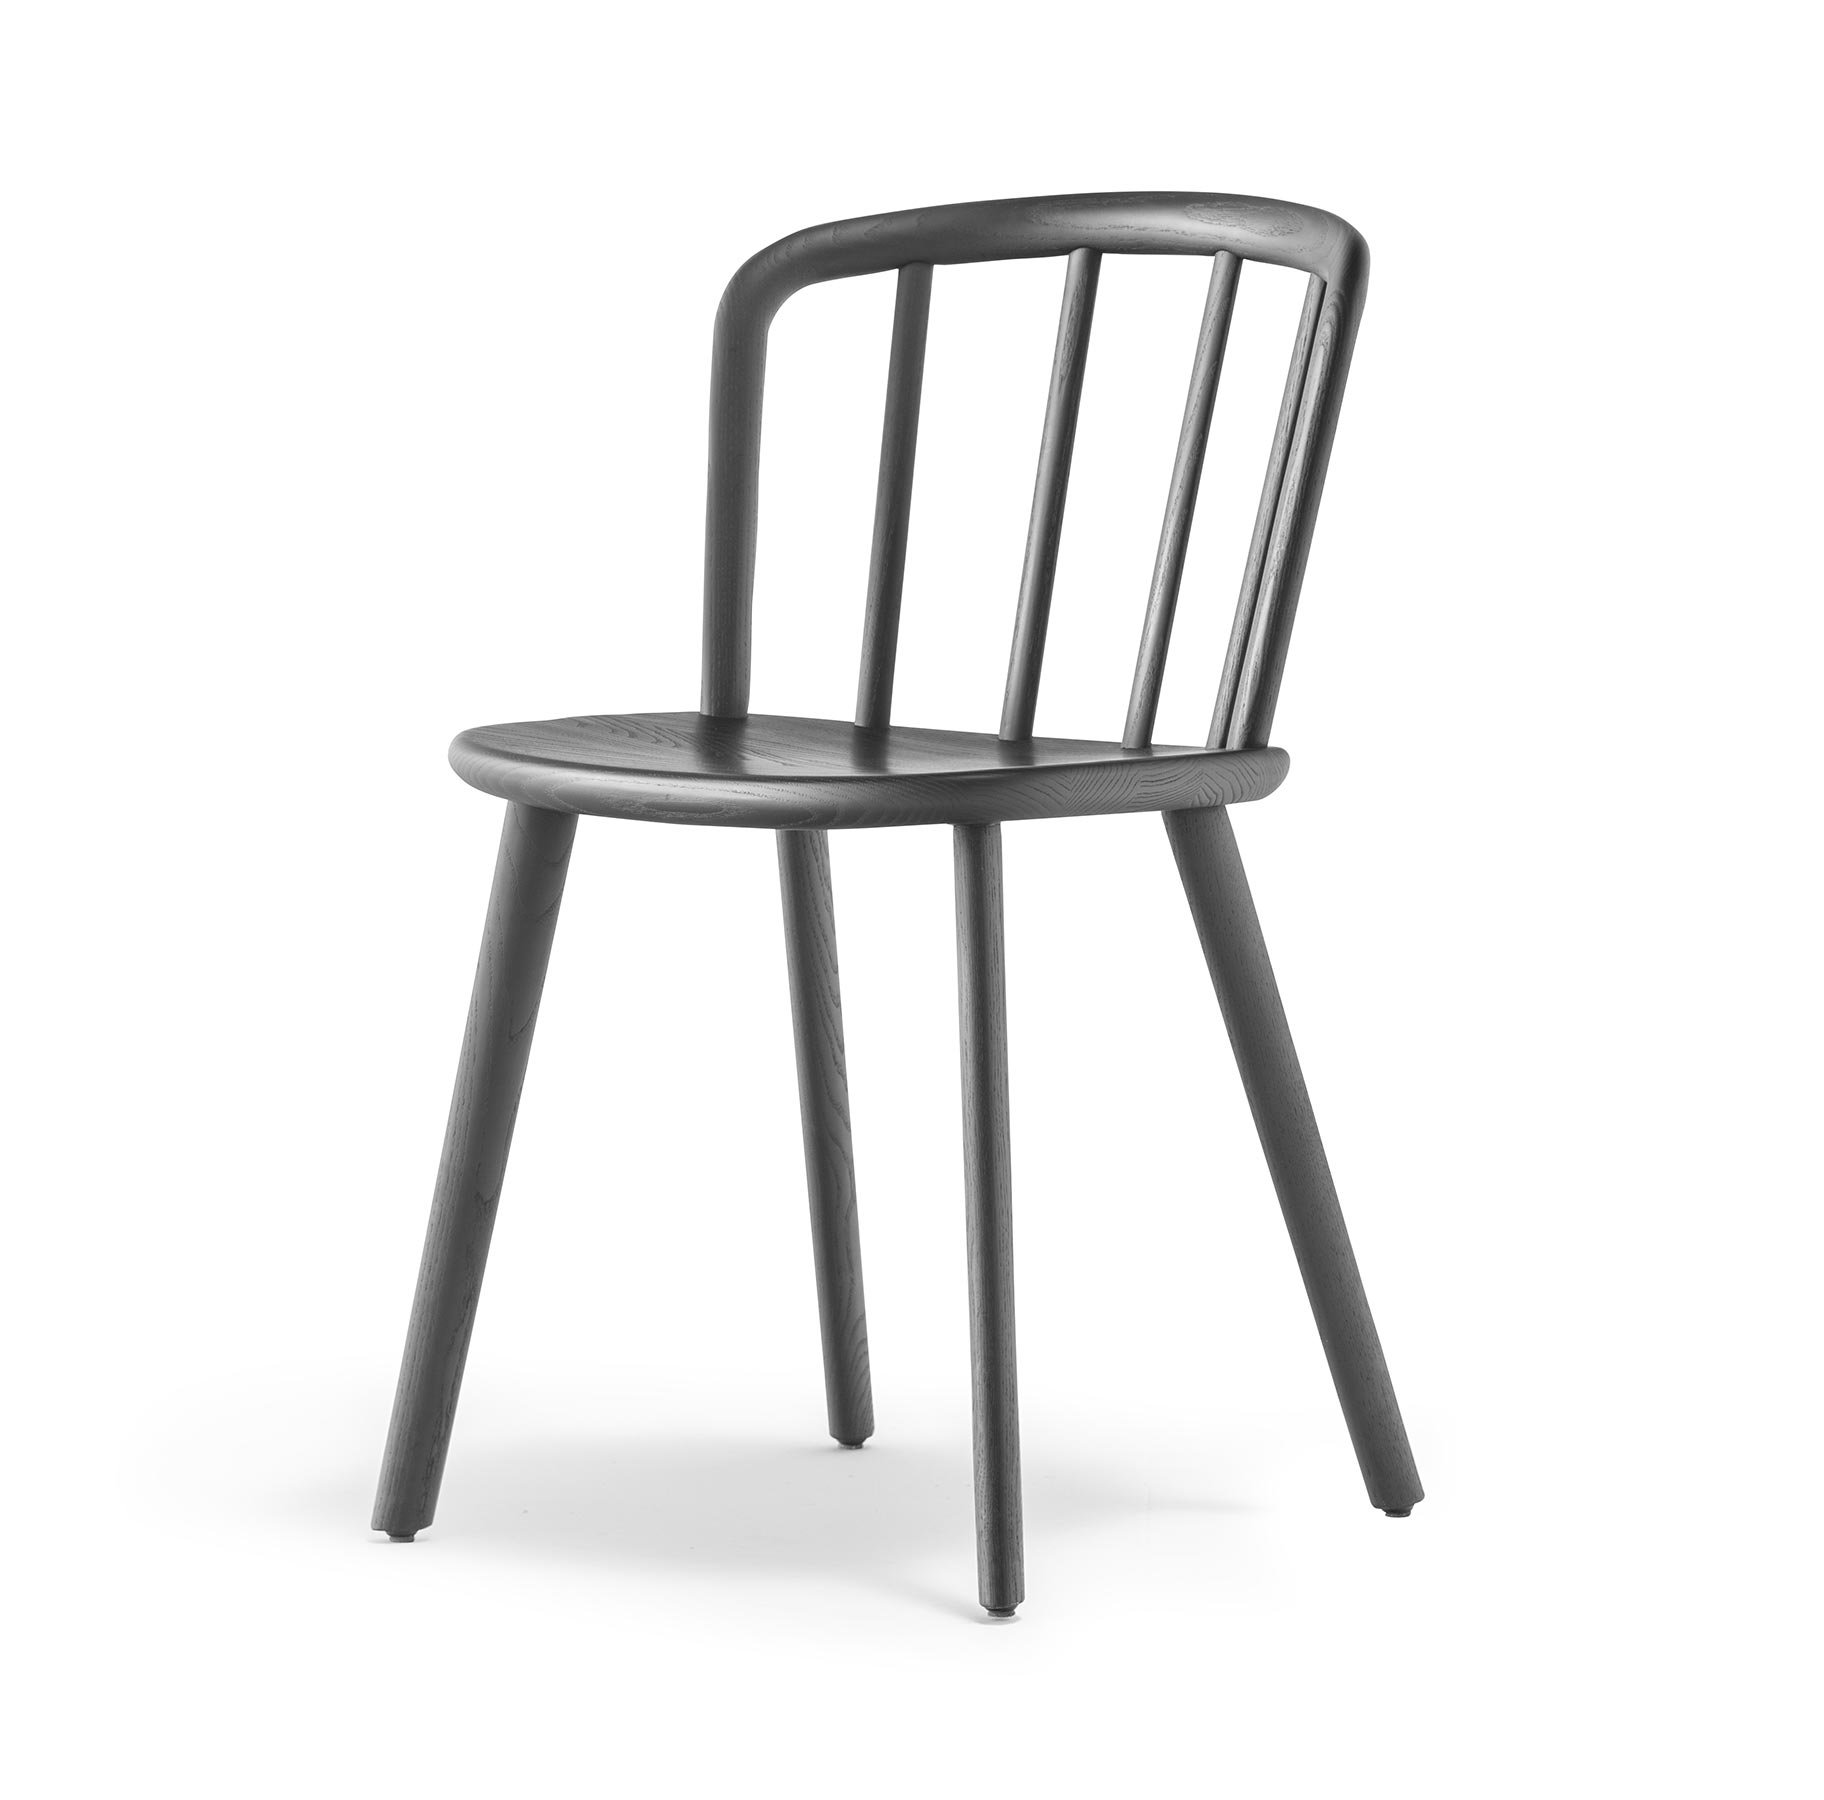 Nym 2830 chair from Pedrali, designed by CMP Design